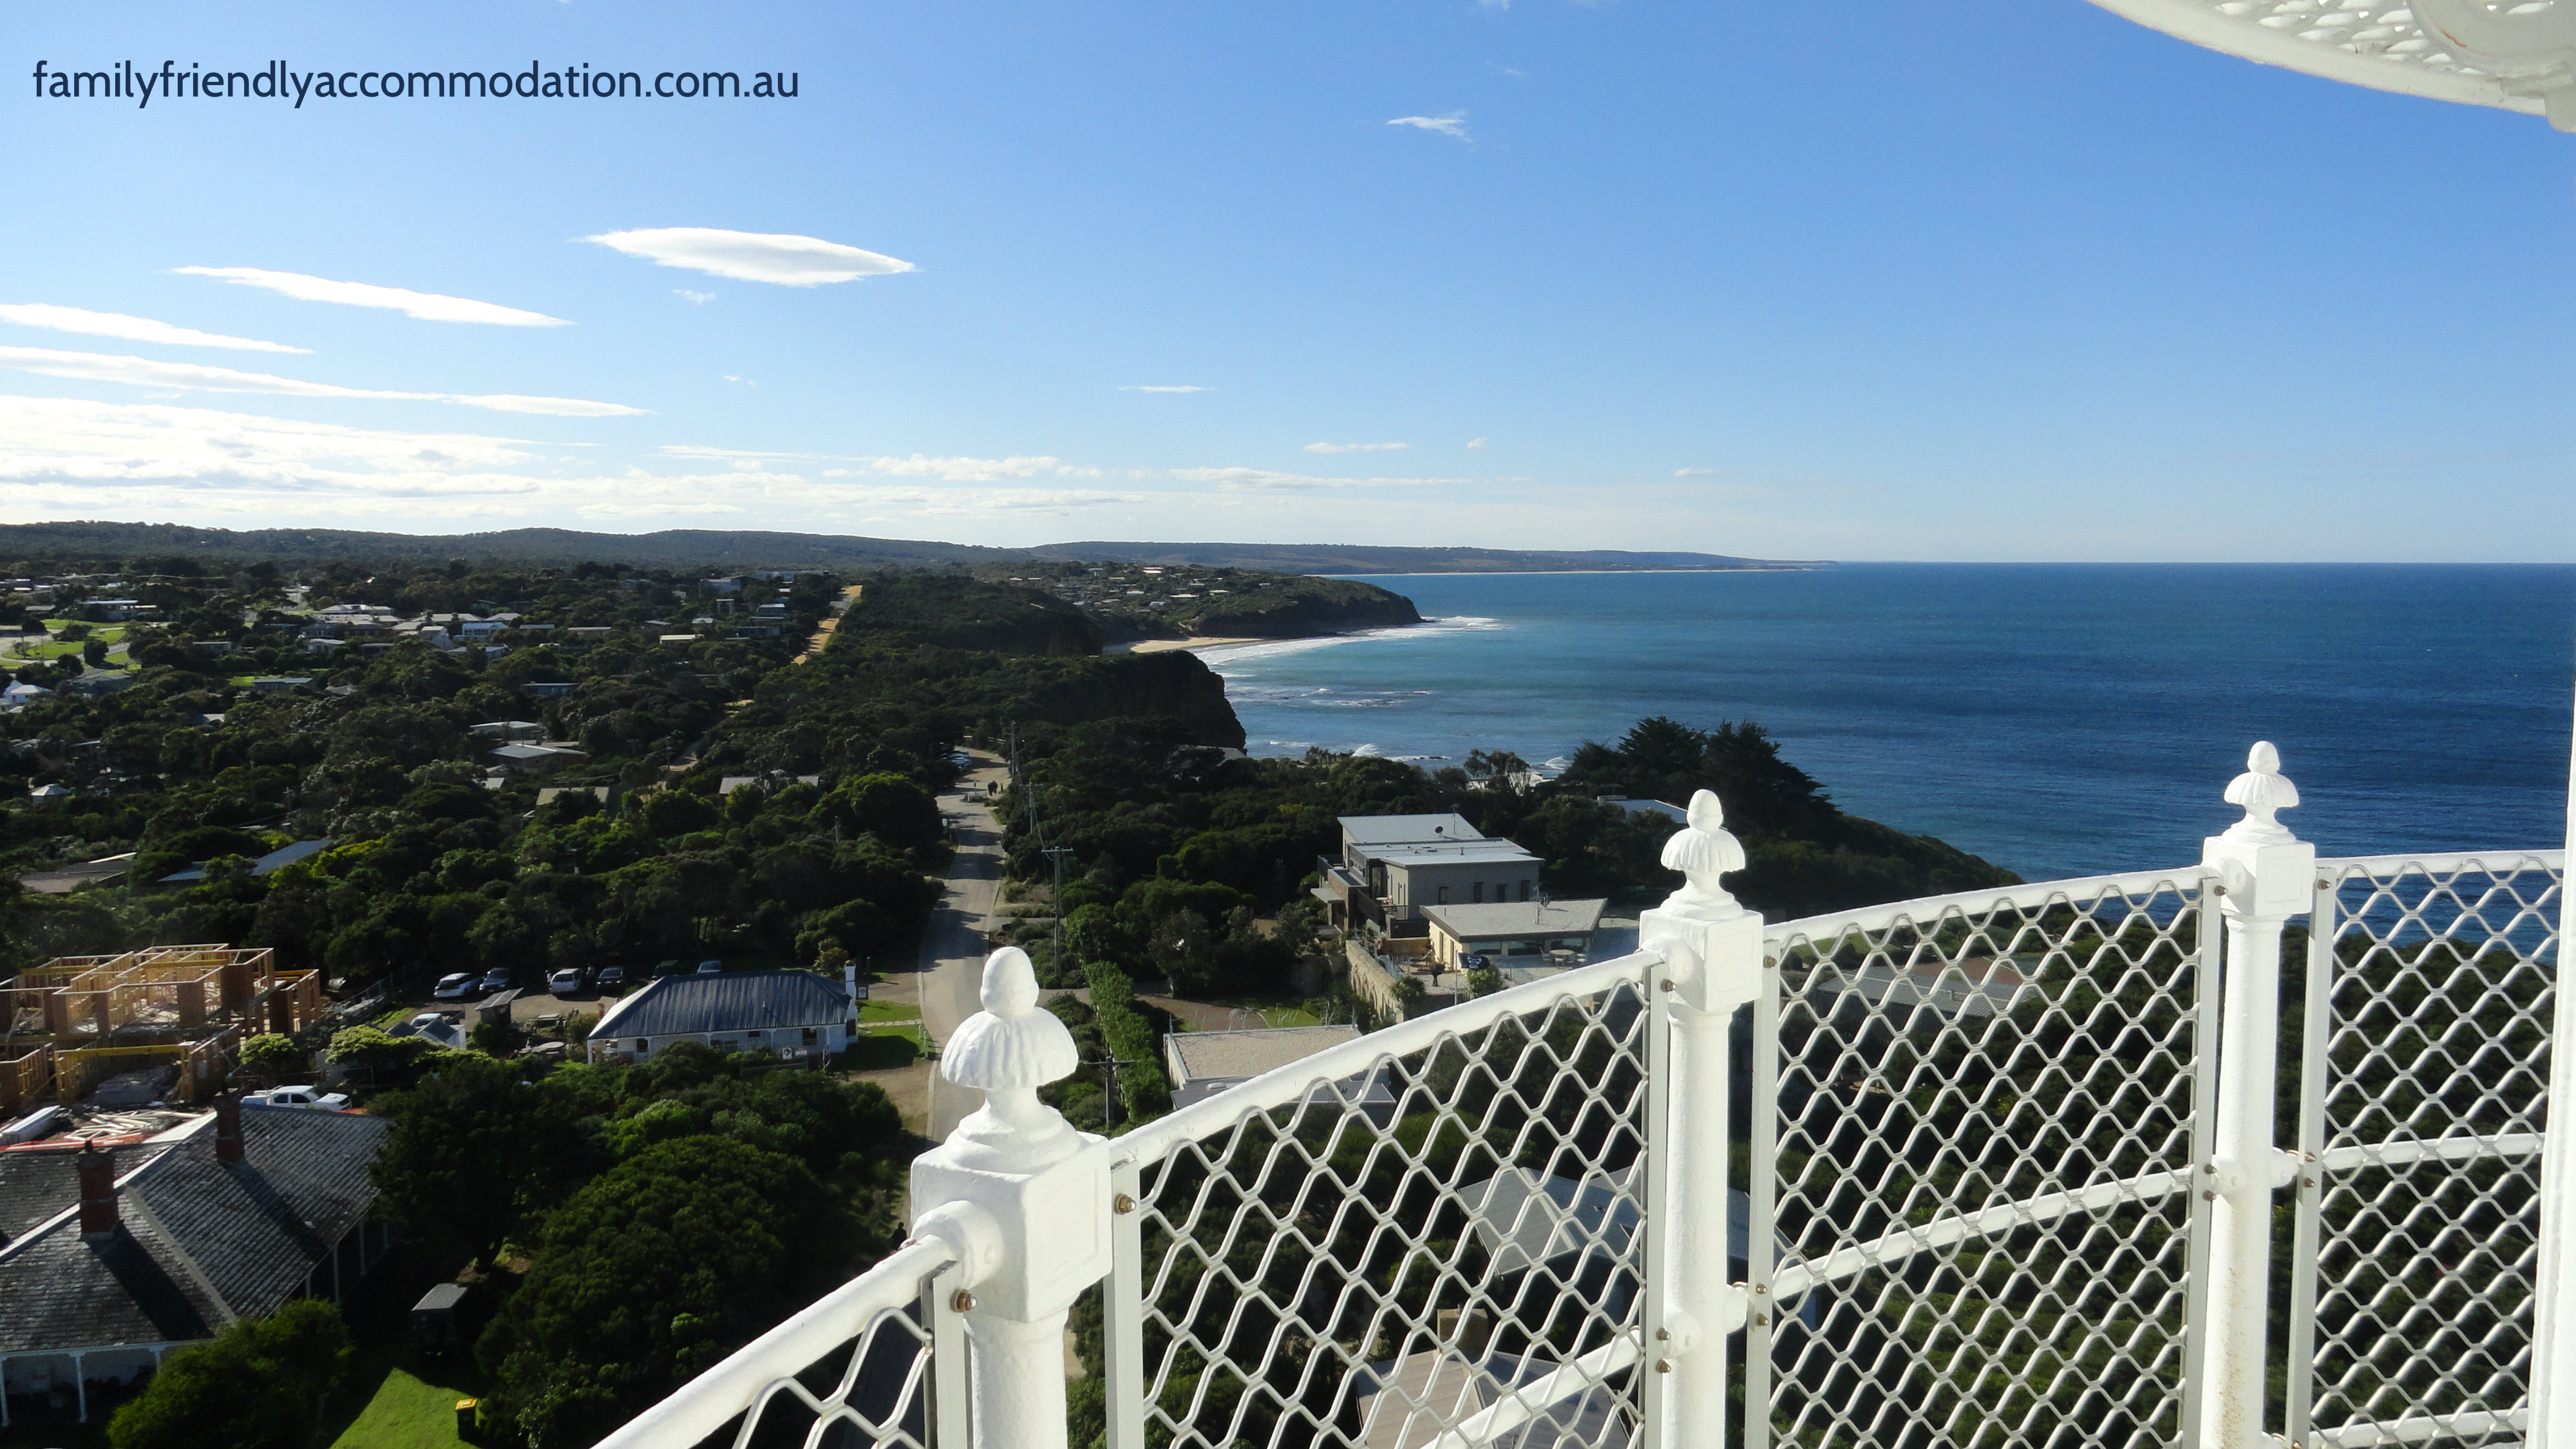 A view from the lighthouse at Aireys Inlet on the Great Ocean Road